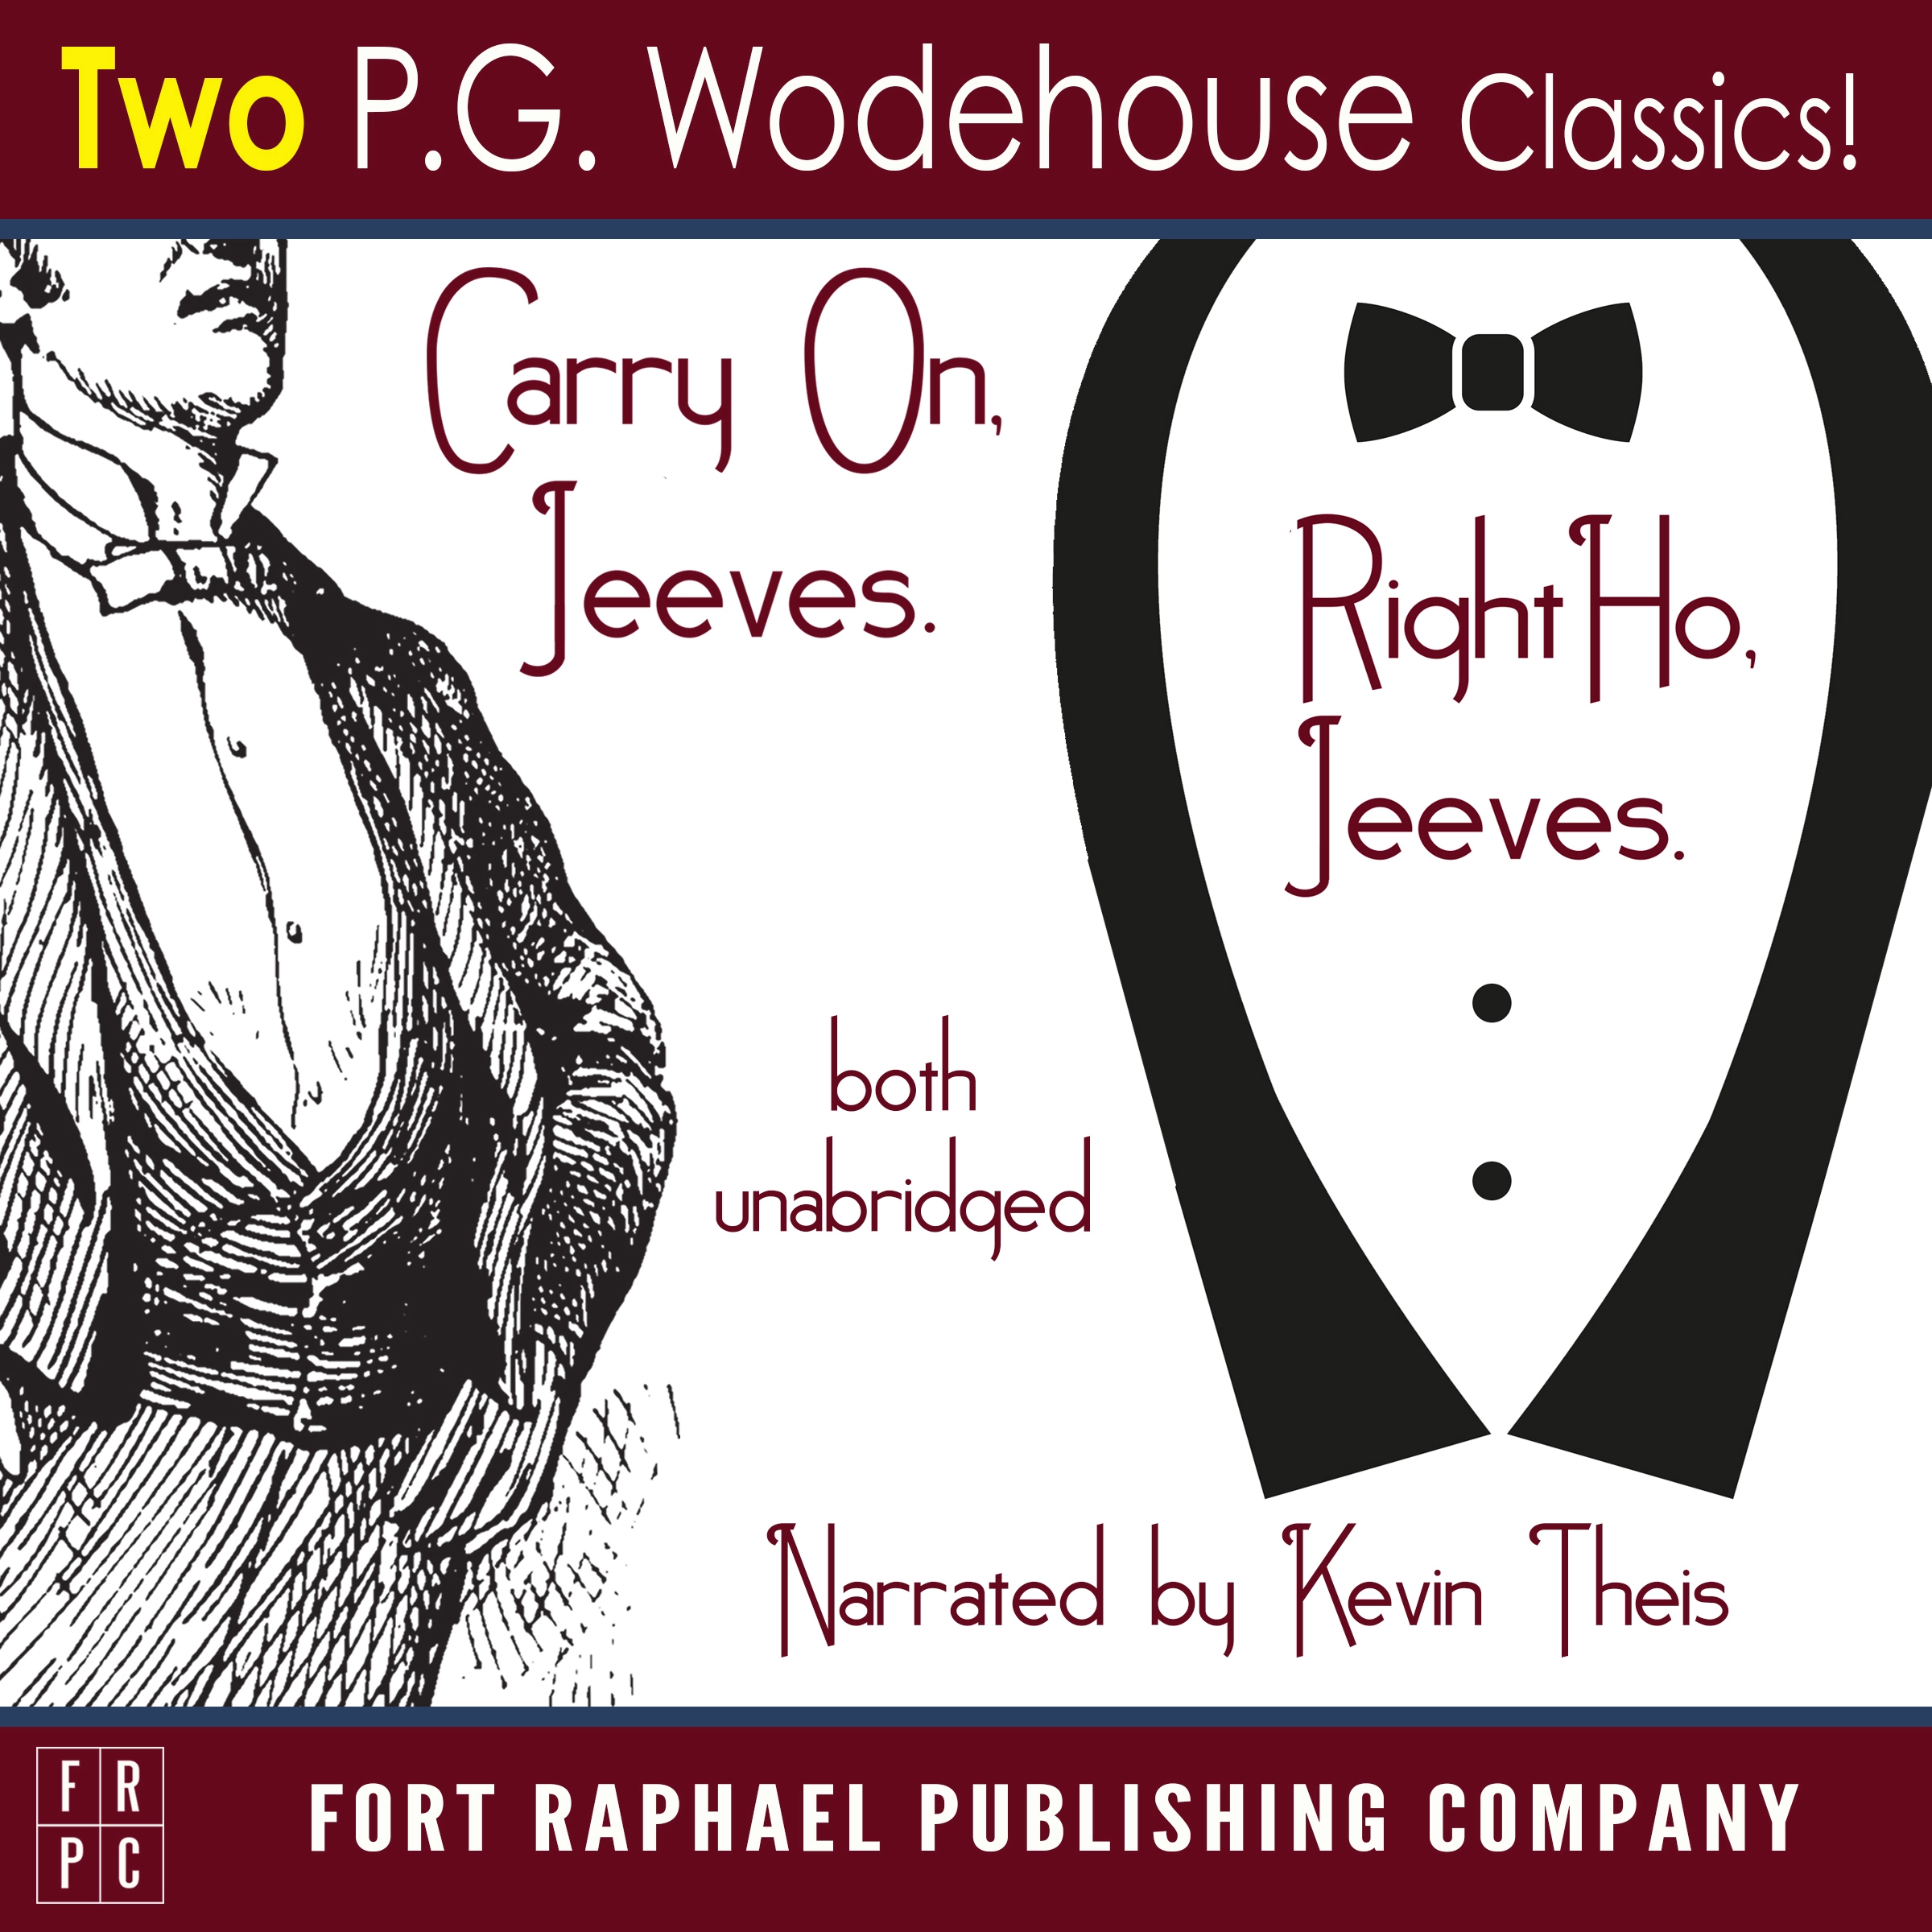 Carry on, Jeeves and Right Ho, Jeeves - TWO P.G. Wodehouse Classics! - Unabridged by P.G. Wodehouse Audiobook